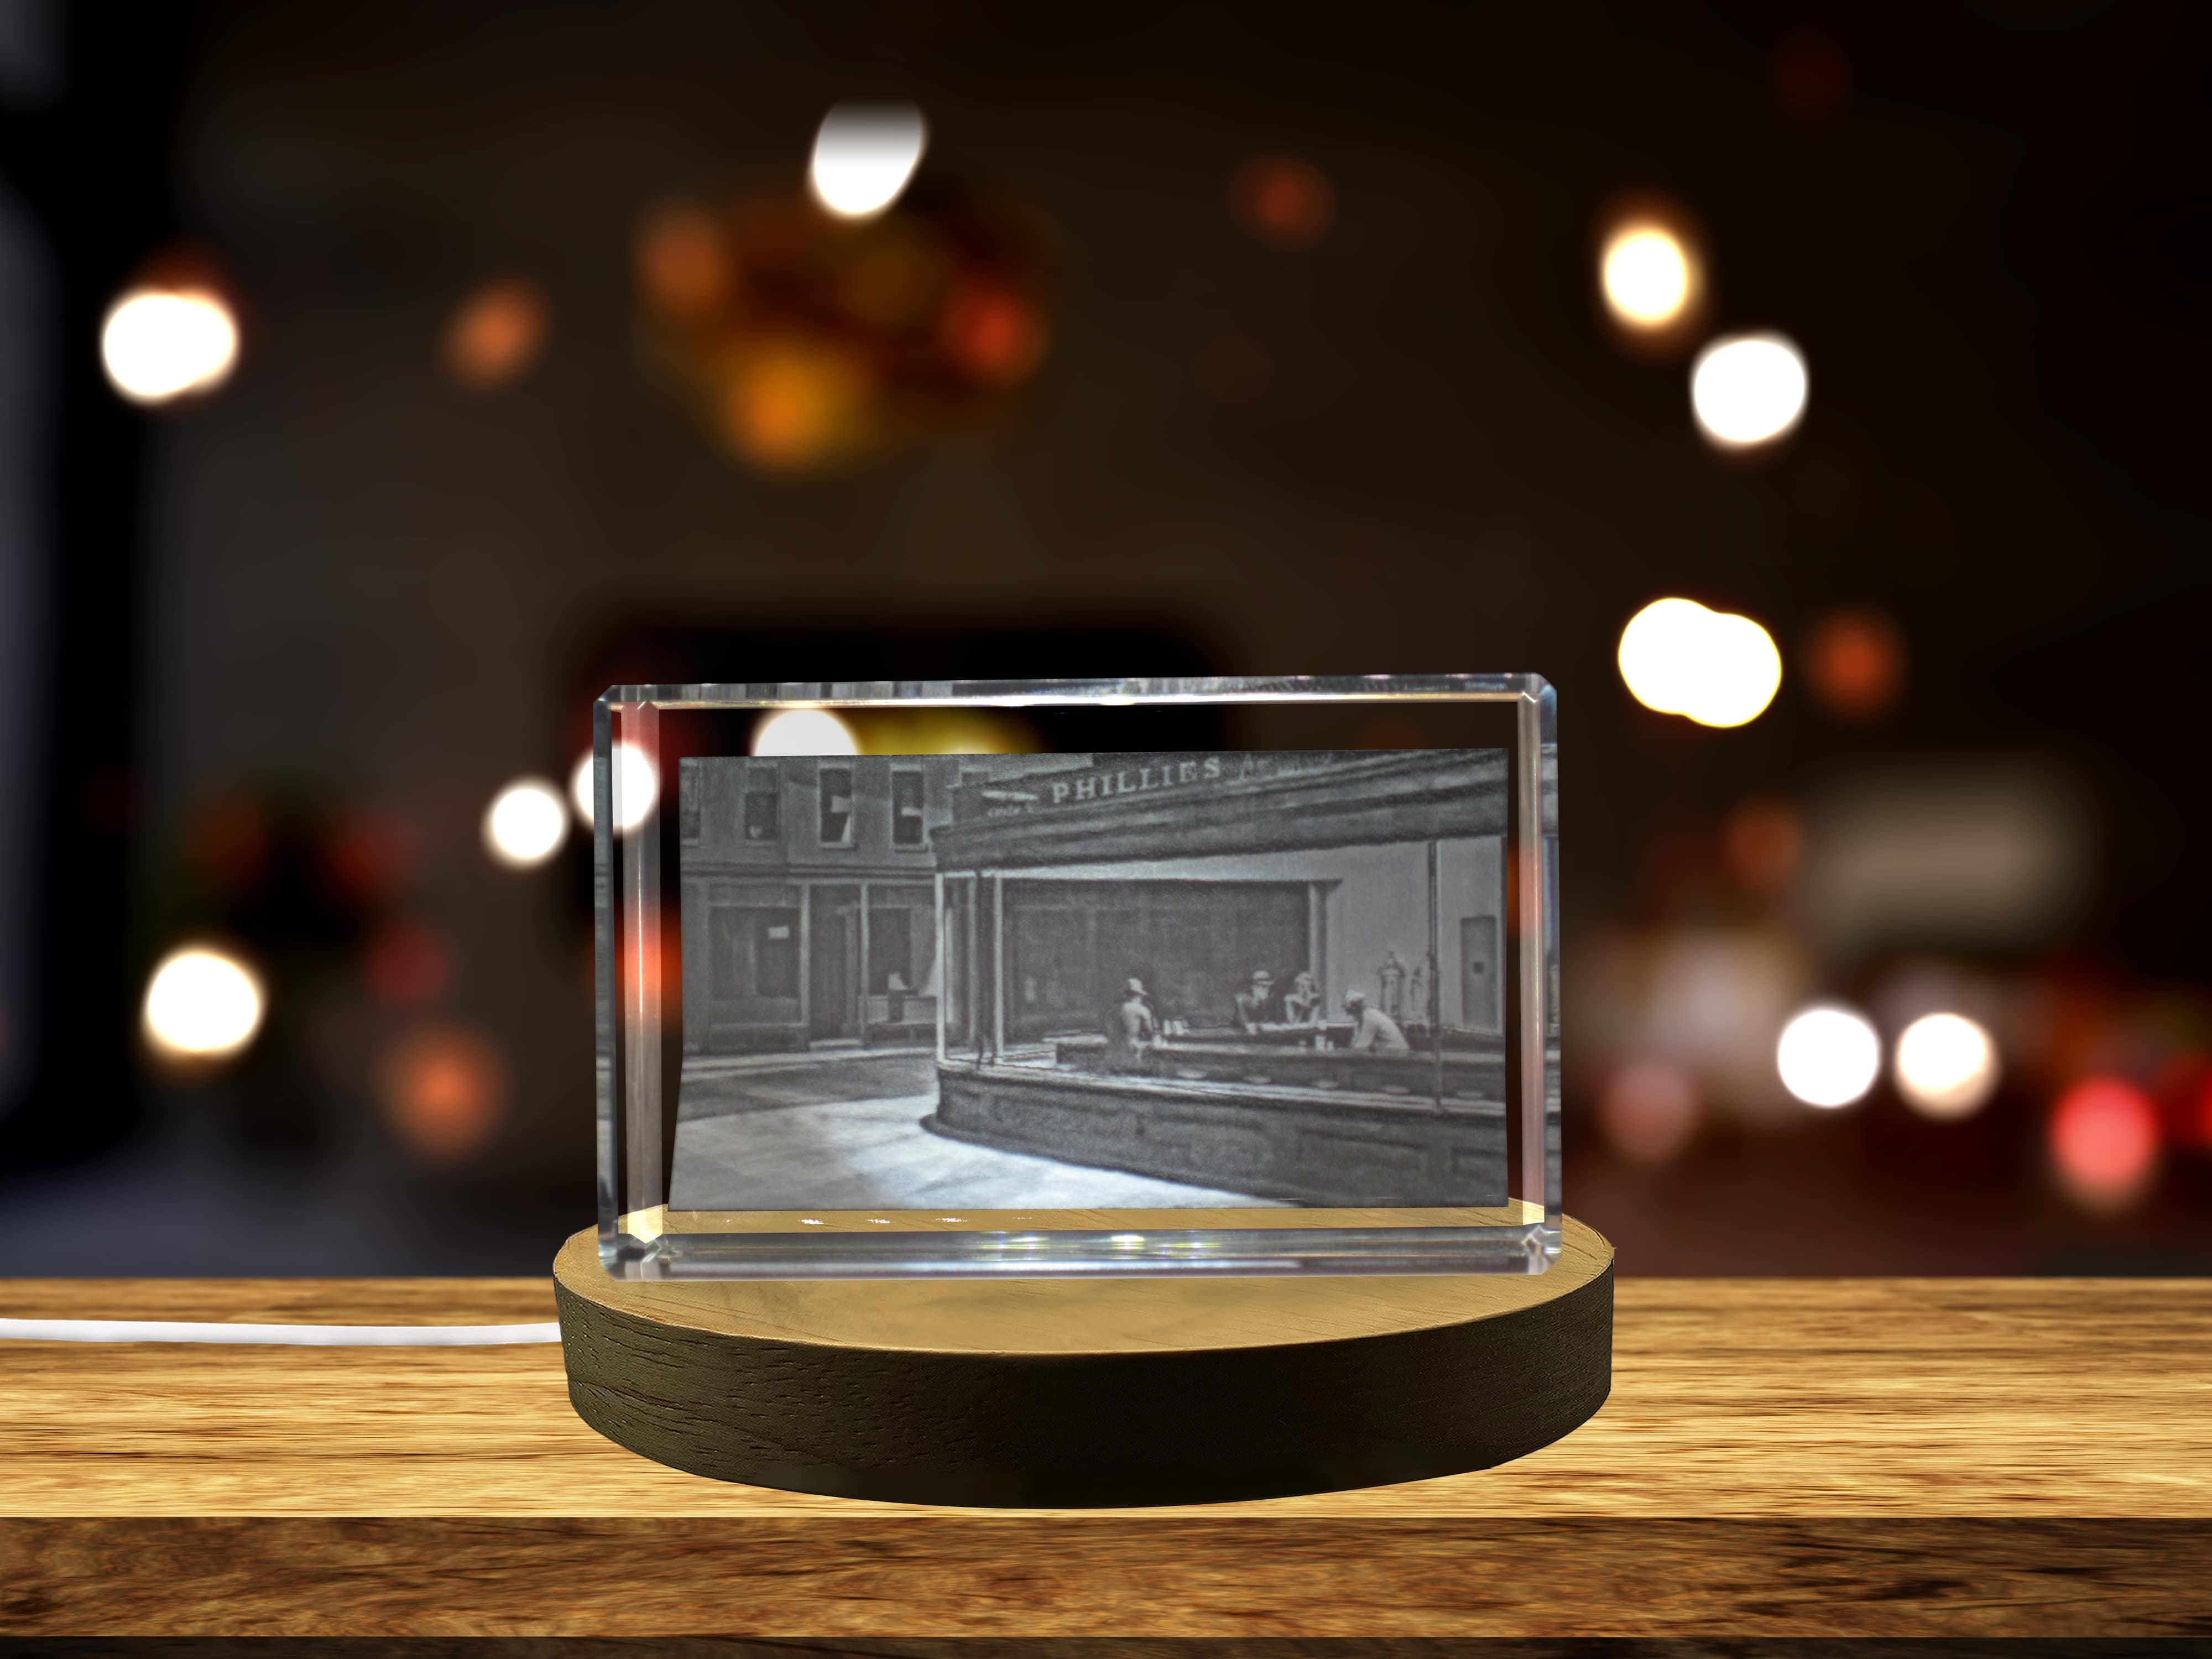 Nighthawks 3D Engraved Crystal Keepsake - Made in Canada, Unique Design, LED Base Included A&B Crystal Collection